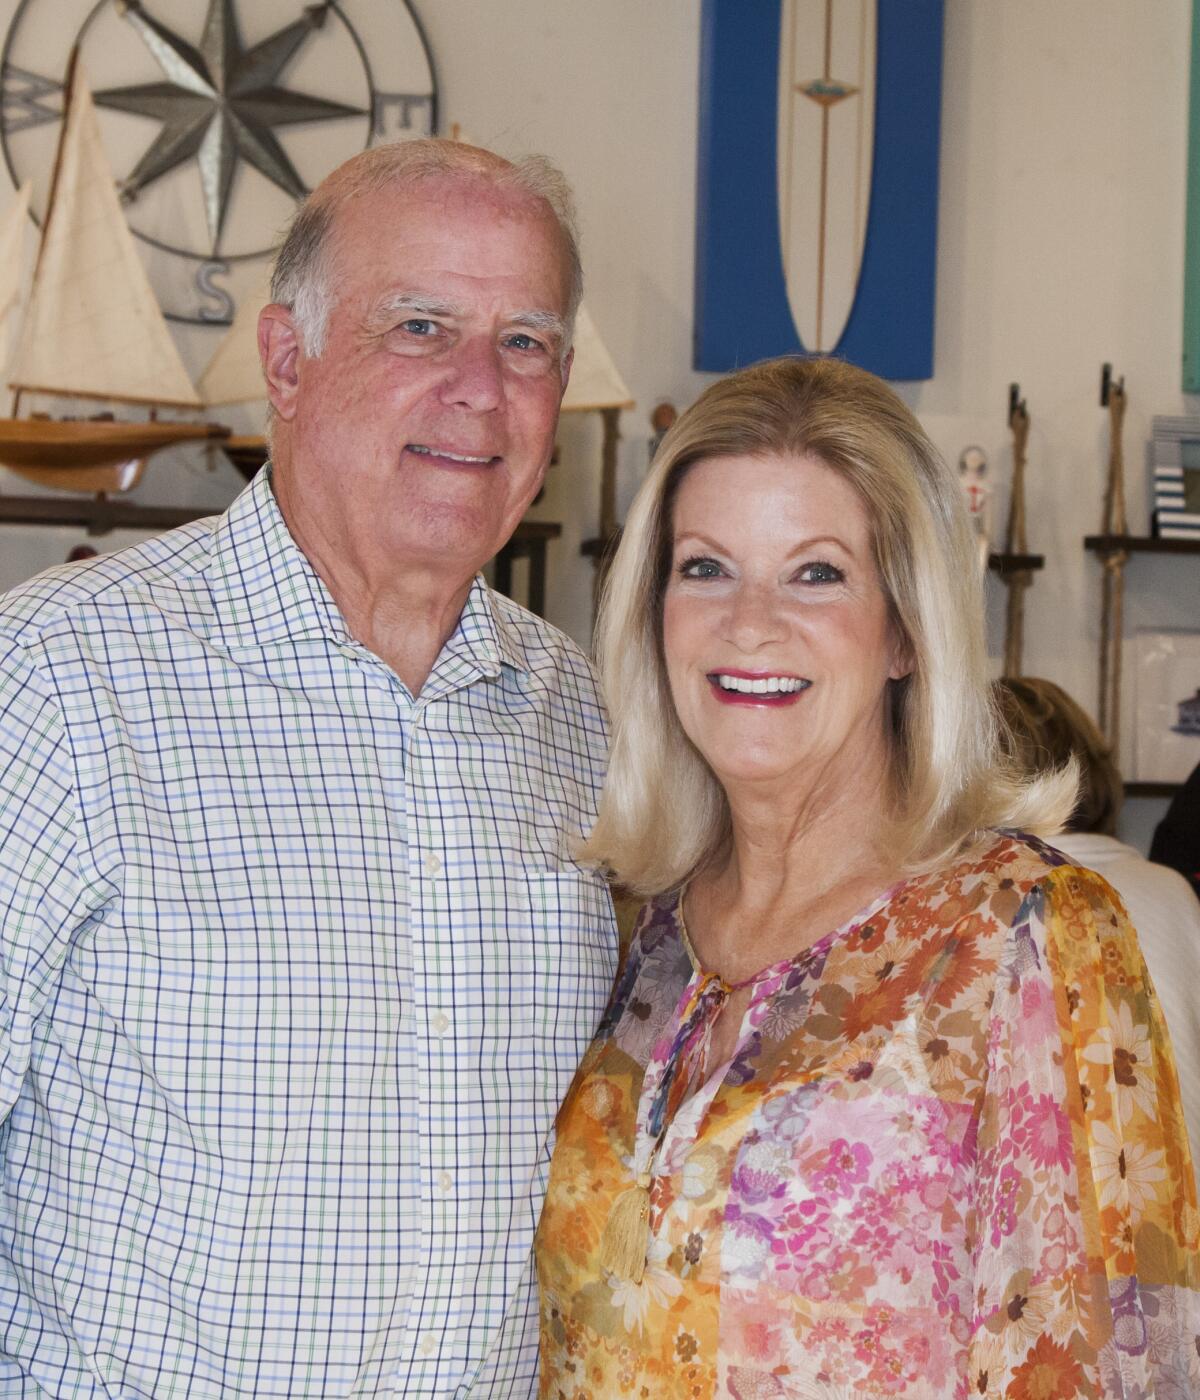 Kimo and Alison McCormick support Balboa Island Museum Guest Speaker Series.